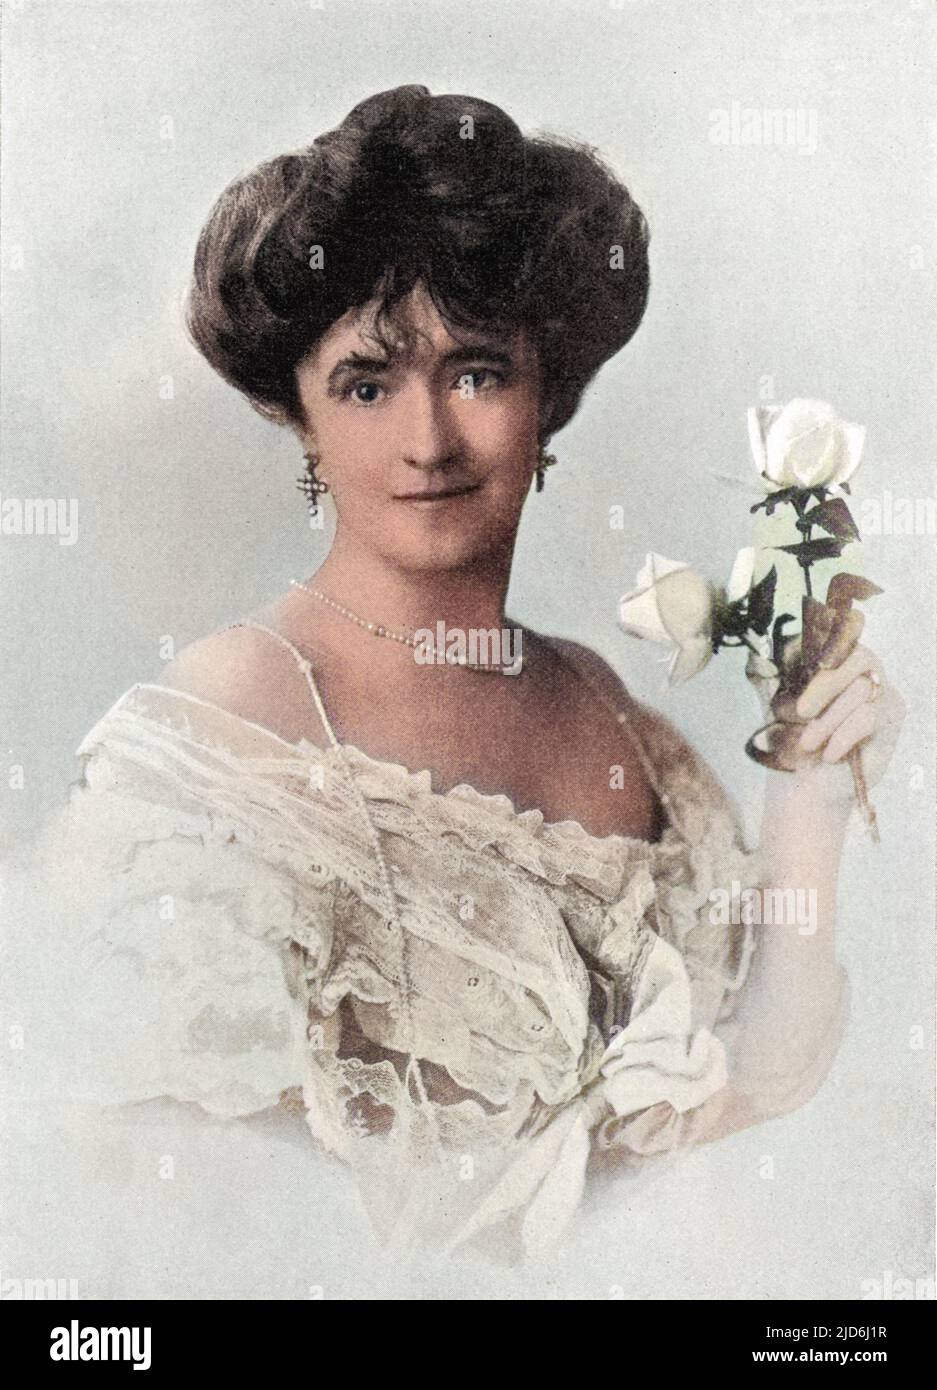 Lucy Christiana, Lady Duff Gordon, a leading fashion designer better known by her professional name, 'Lucile'. She was the proprietor of Lucile's, Hanover Square, famous for the 'emotional' gown. Sister of the writer, Elinor Glyn and wife of Sir Cosmo Duff Gordon. Colourised version of: 10284957       Date: 1863-1935 Stock Photo